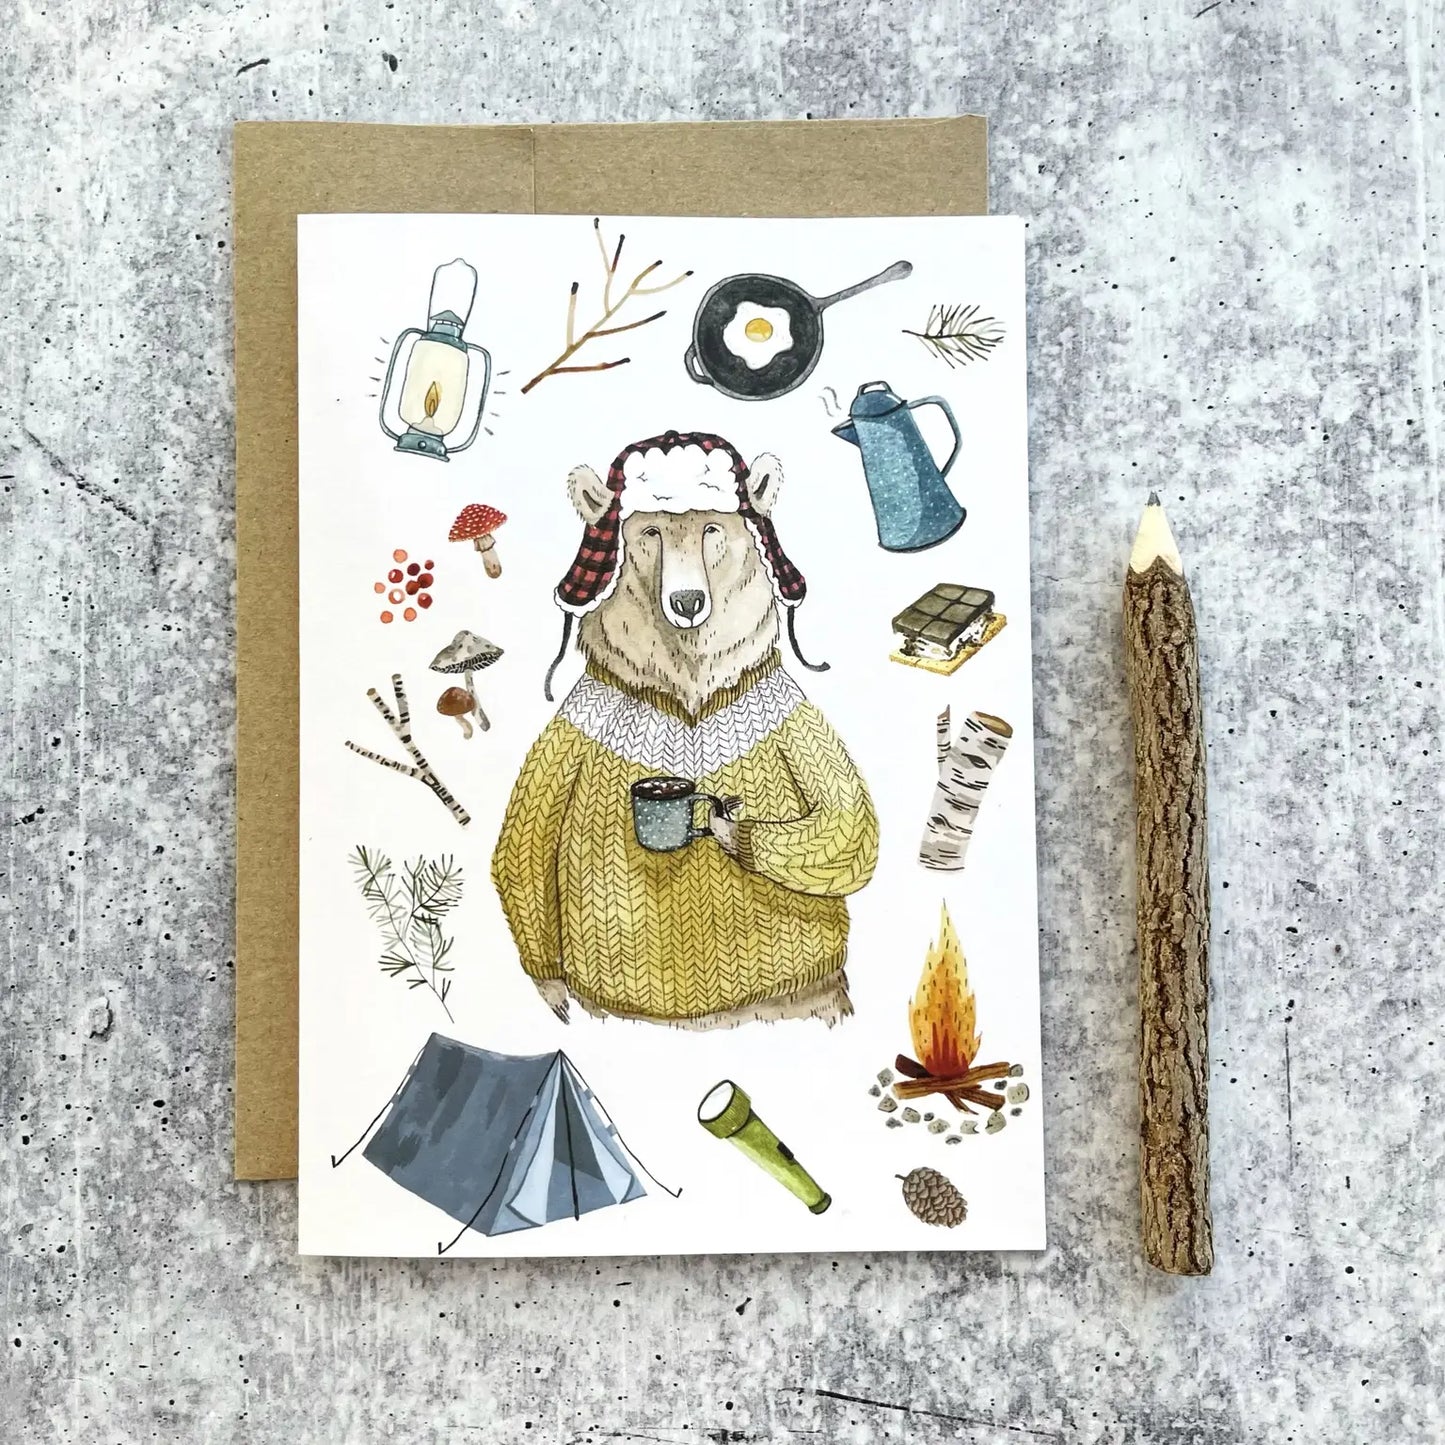 CAMPING BEAR CARD from Little Pine Artistry, The Olde Curiosity Shoppe